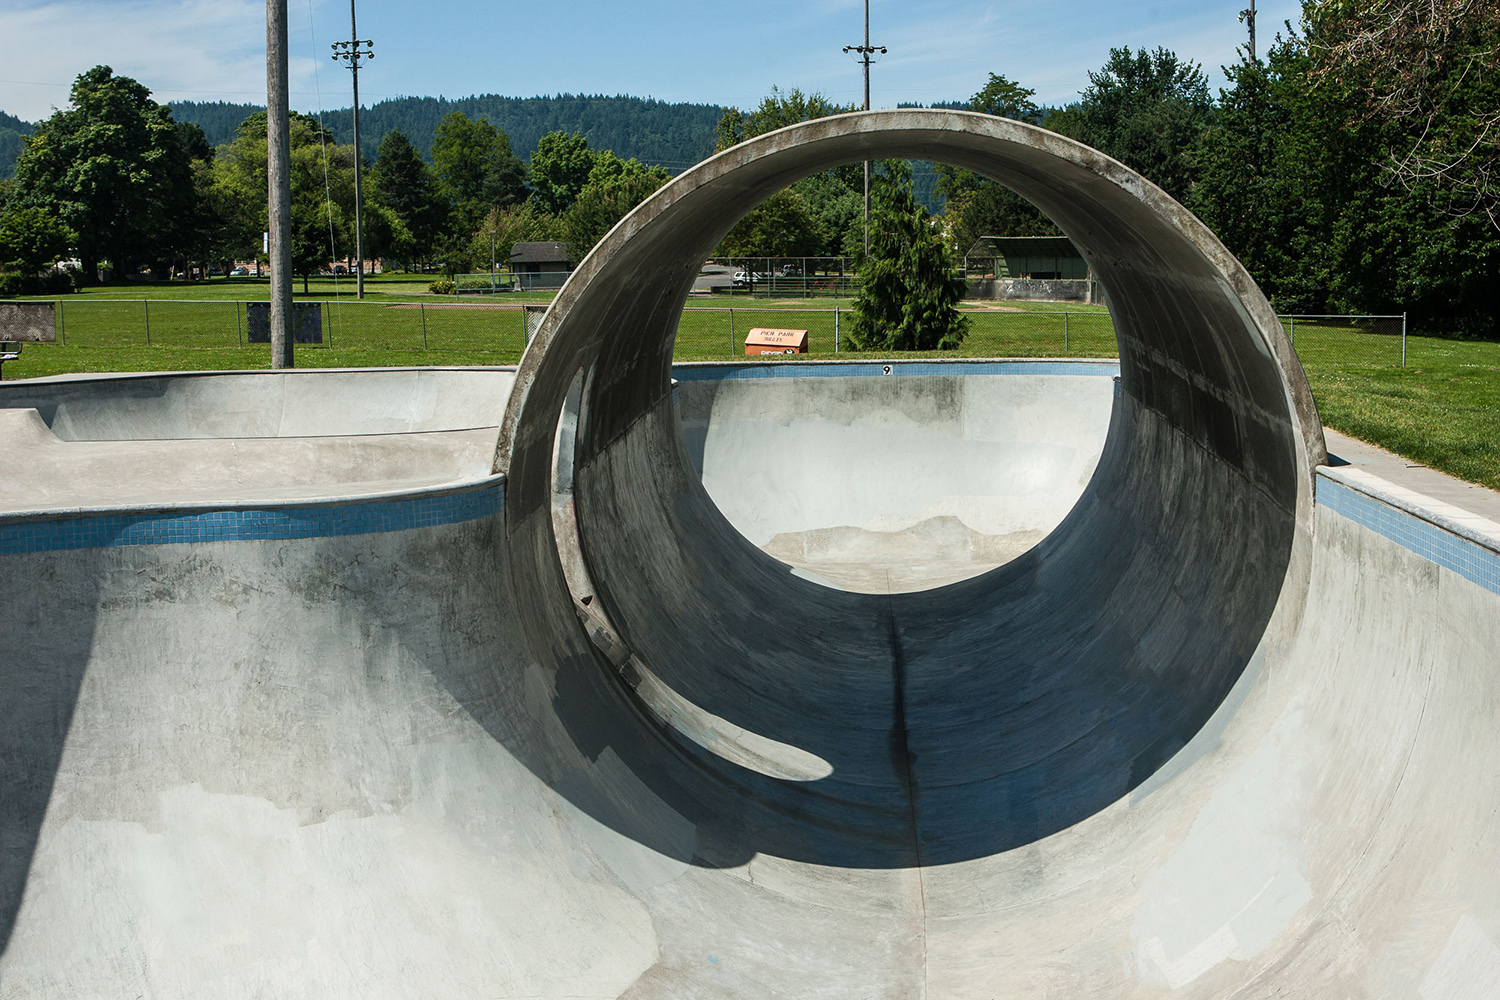  Pier Park Skatepark features an 18-foot full pipe with a mouse hole entry way and two connecting bowls topped with tile and pool coping. Additionally, there are two flow bowls and a street area to entertain and challenge skaters of all ages and abil